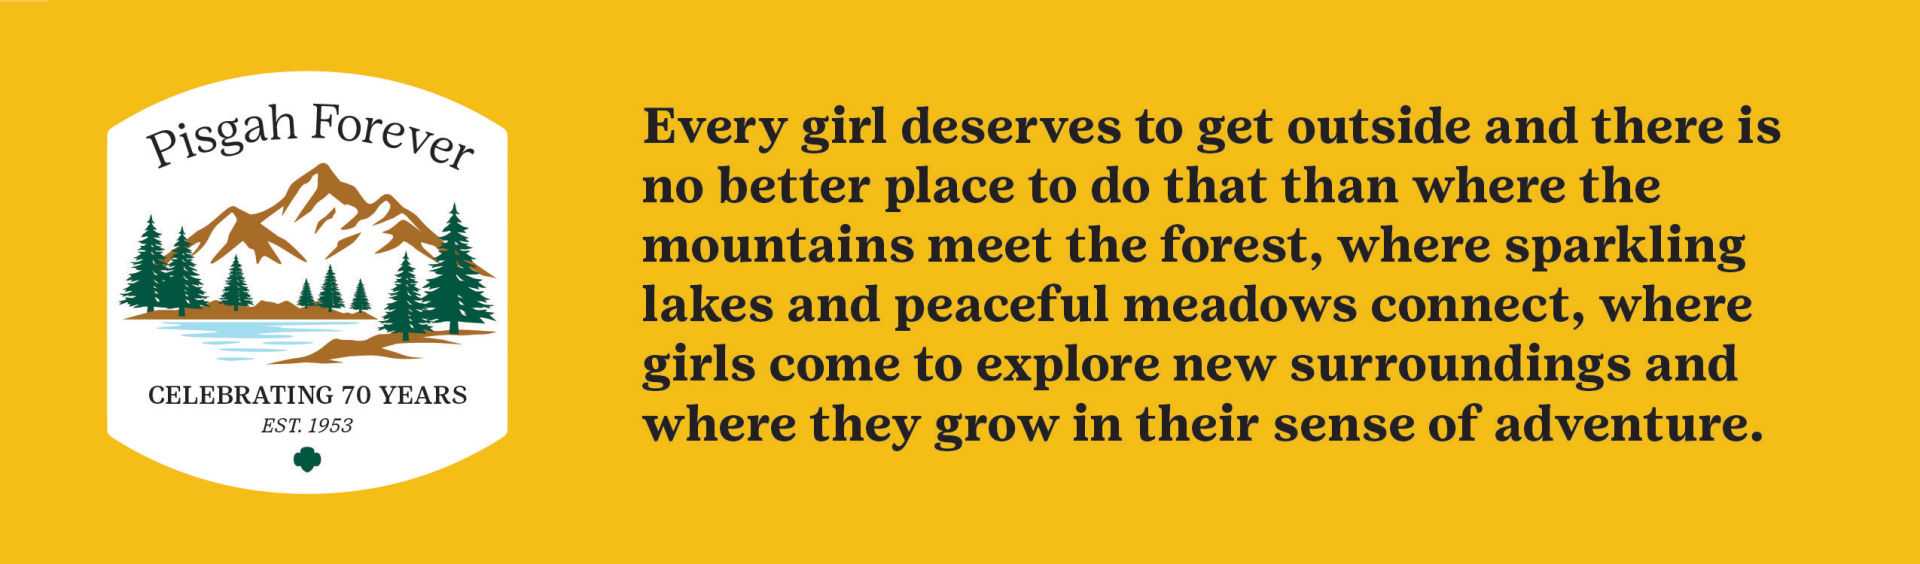 Pisgah Forever logo. Every girl deserves to get outside and there is no better place to do that than where the mountains meet the forest where sparking lakes and peaceful meadows connect, where girls come to explore new surroundings and where they grow in their sense of adventure.